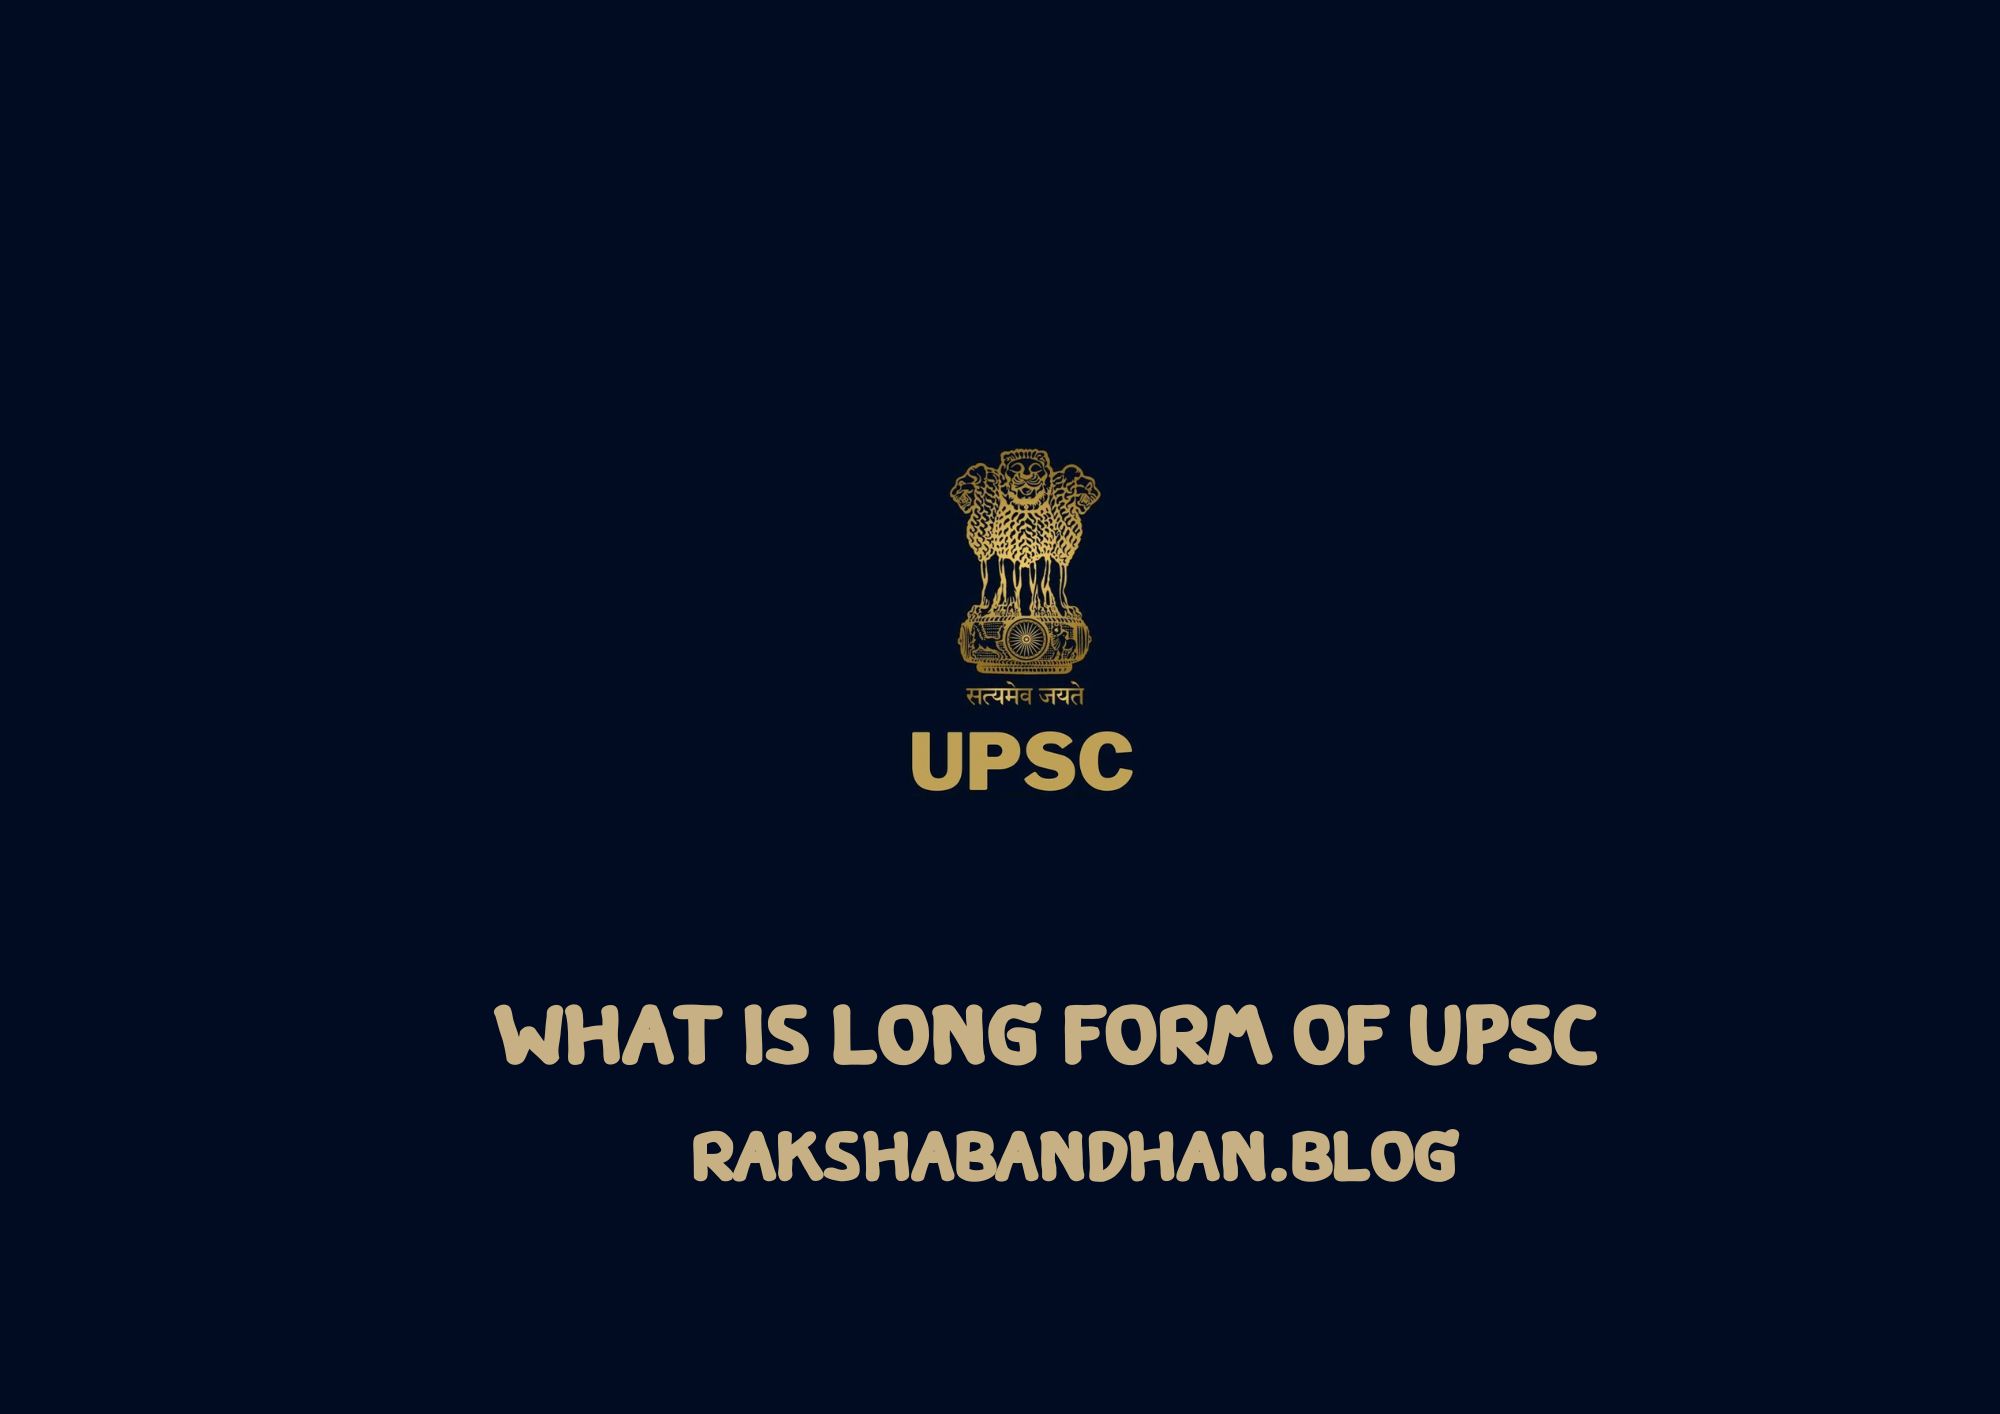 Long Form Of UPSC - What Is UPSC, What Is UPSC Long Form